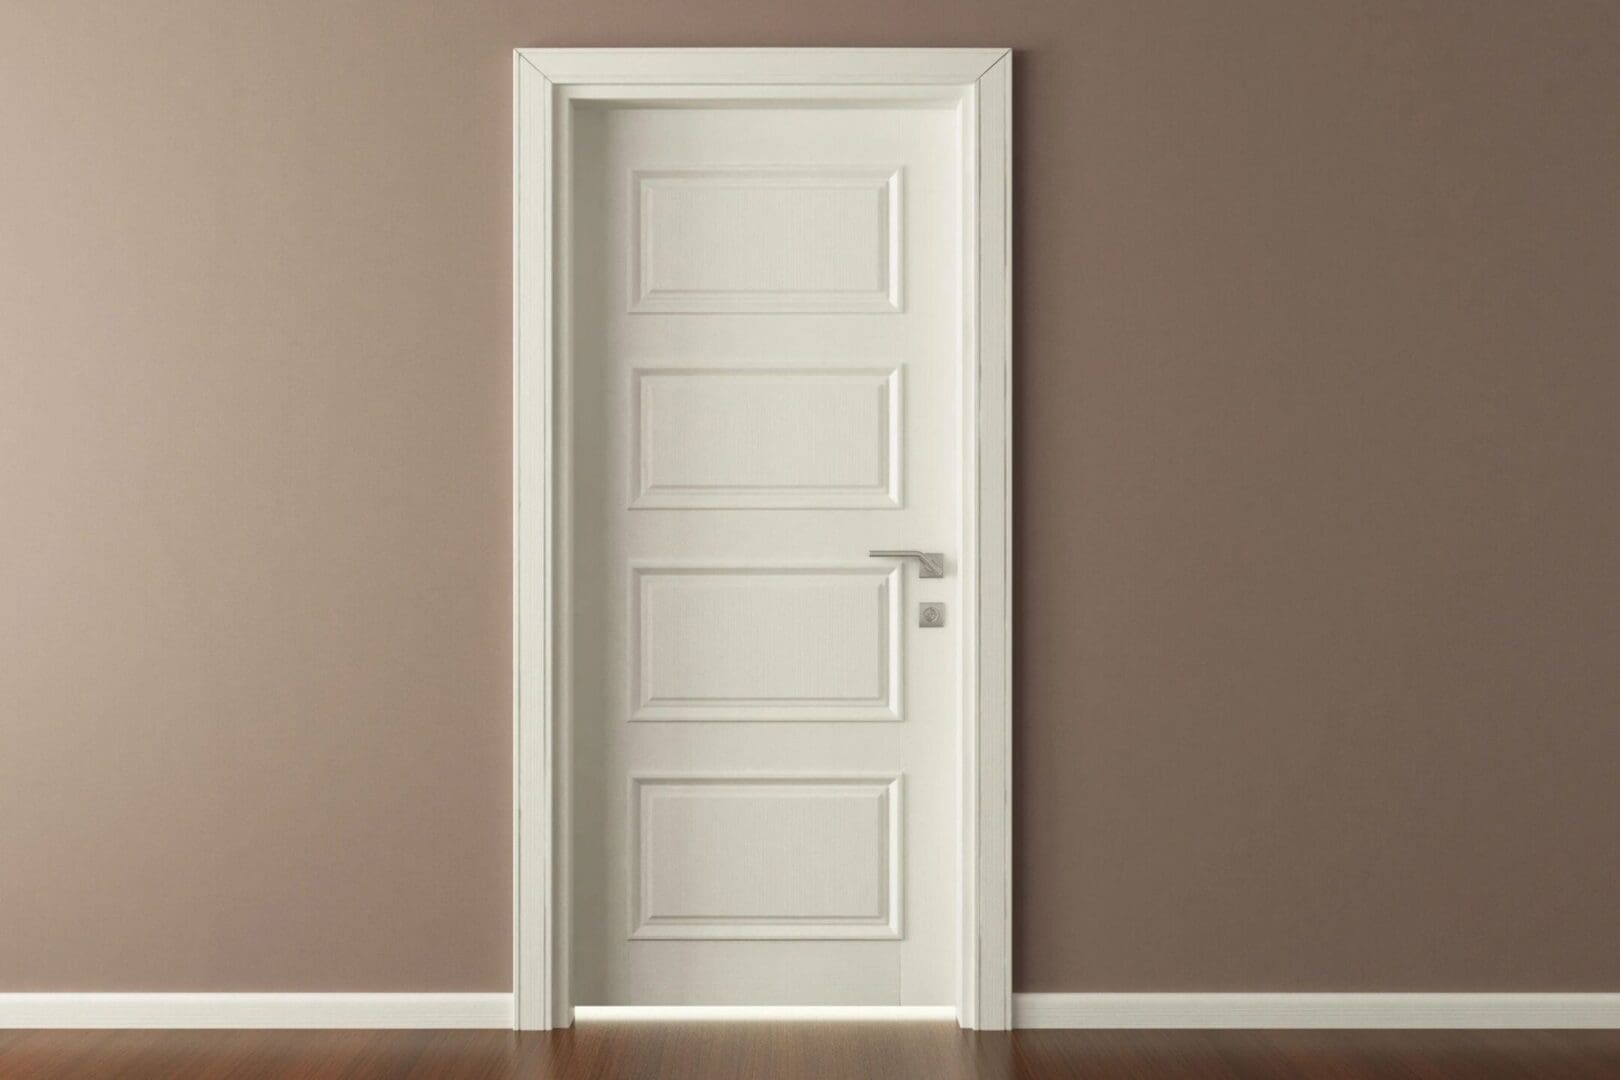 A white door with four panels and a metal handle.